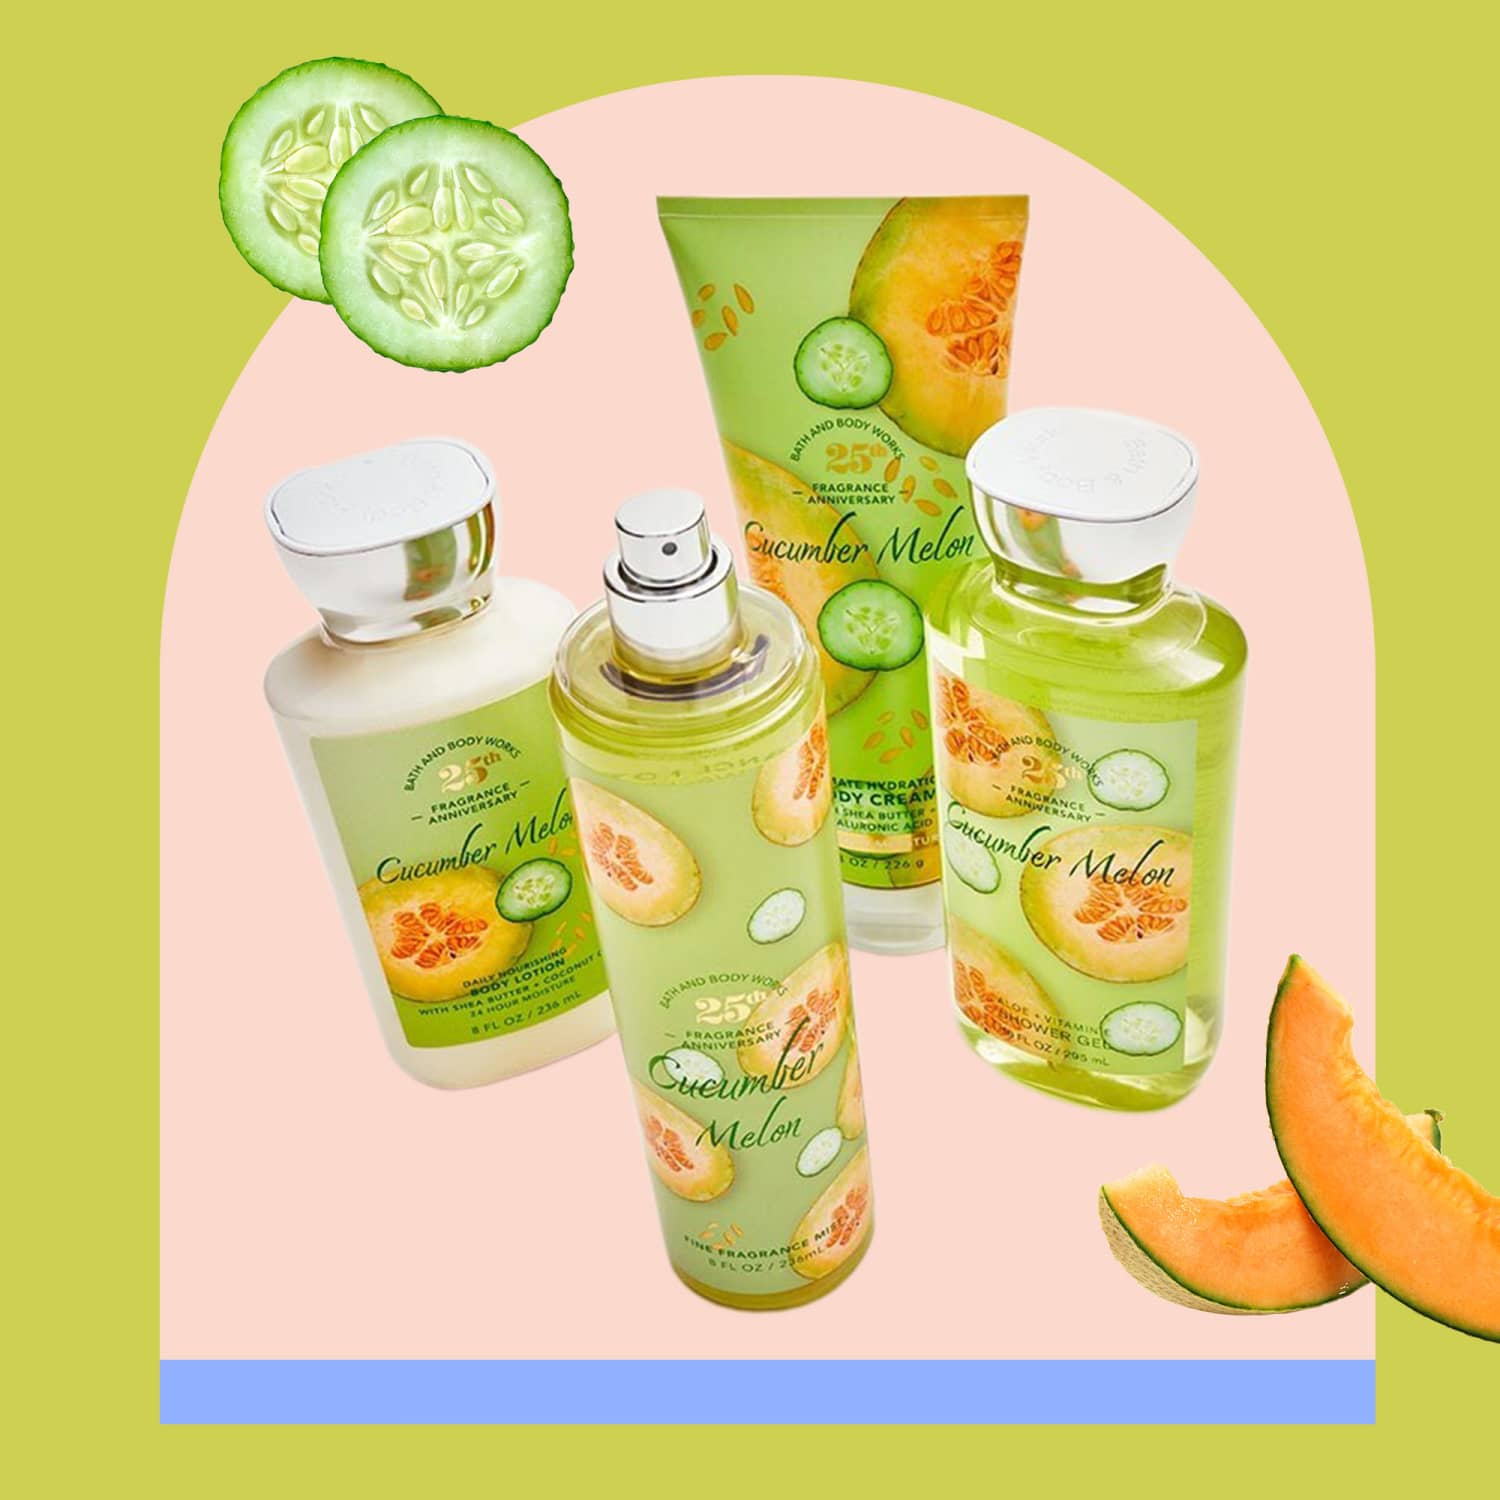 Cucumber Melon: Bath & Body Works' Scent Is Back